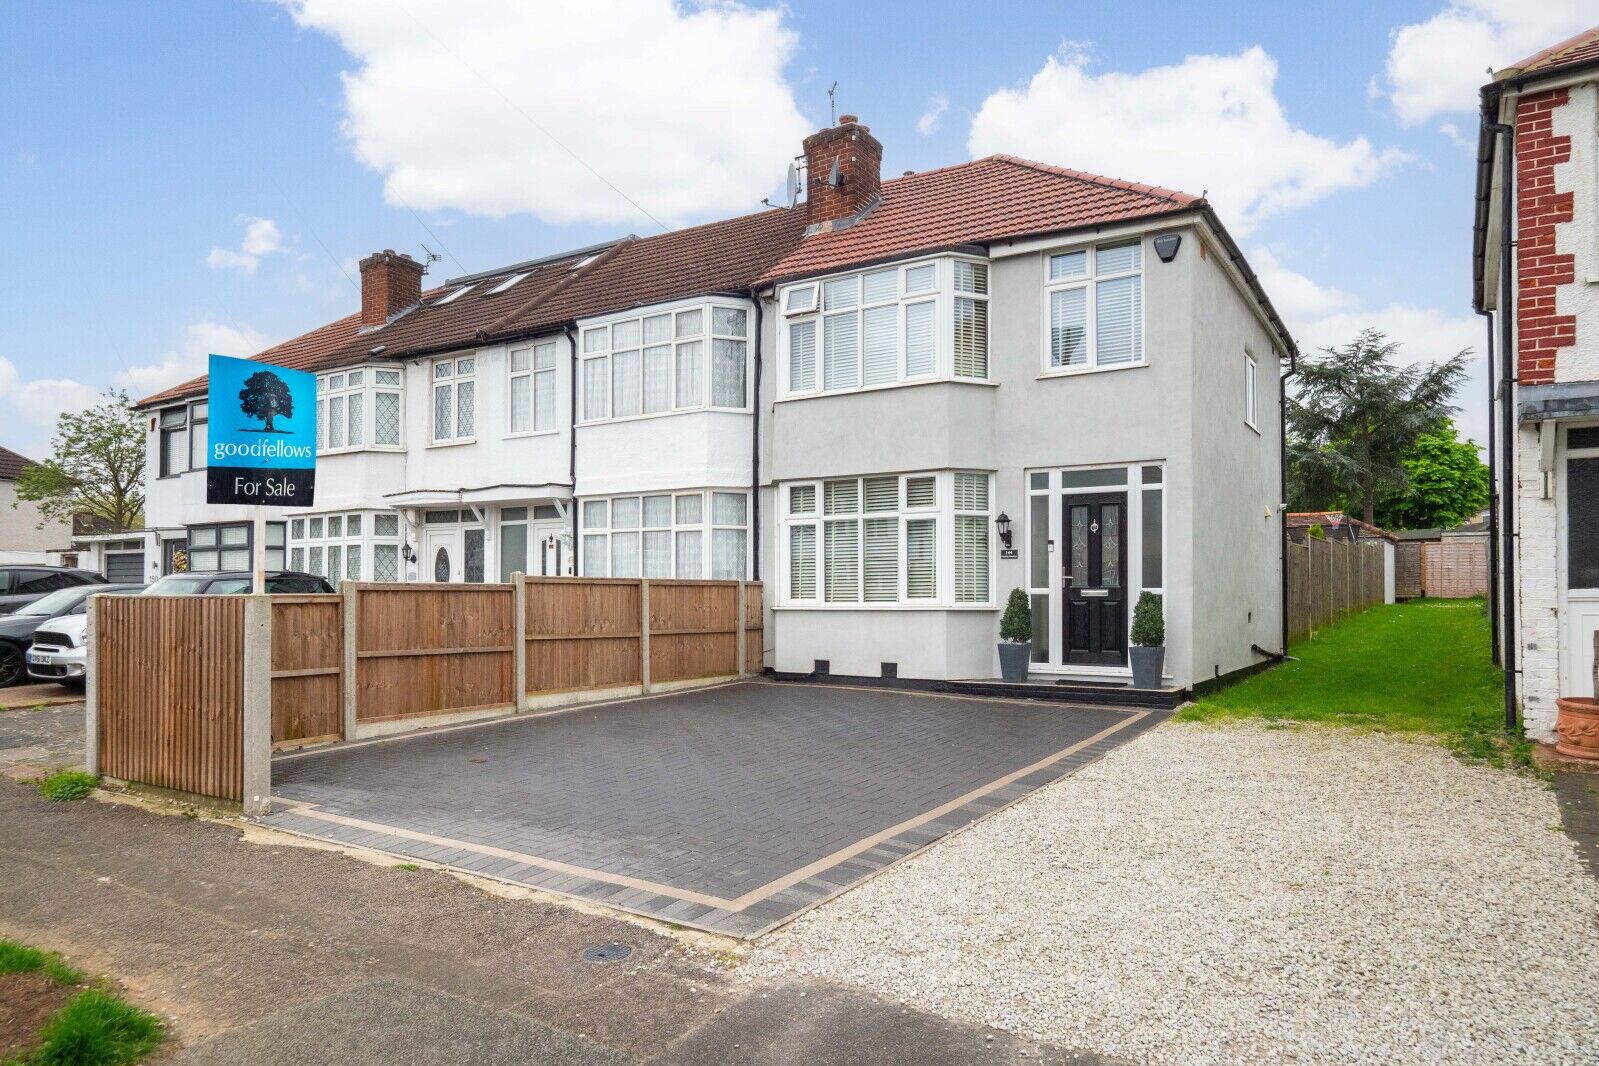 3 bedroom end terraced house for sale Henley Avenue, Cheam, SM3, main image